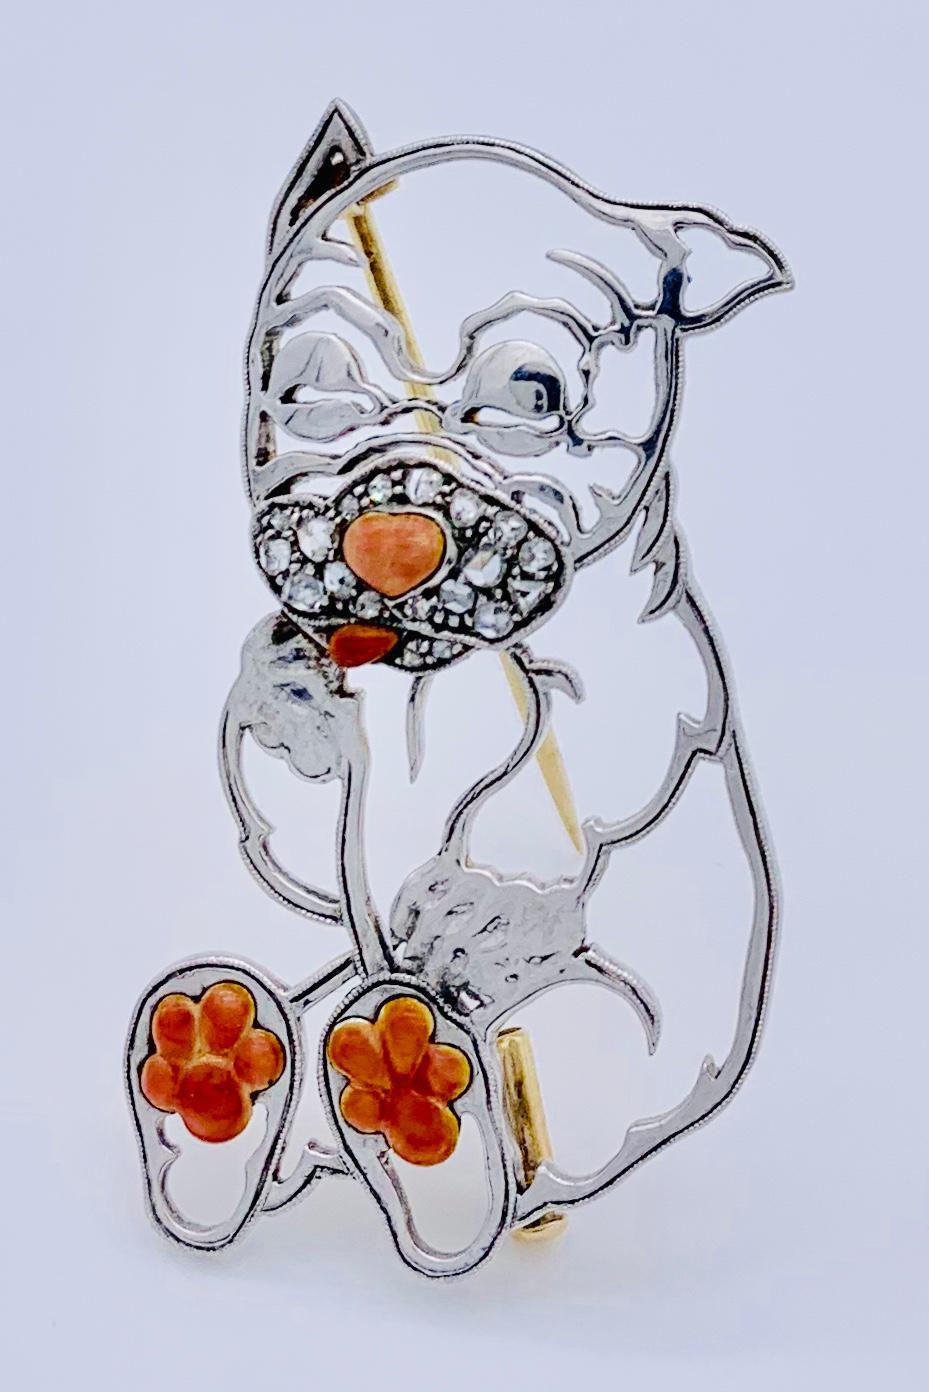 This charming baby bulldog is an exquisite example of Viennese goldsmithing. This outstanding and unusual brooch has been sawn out of 14 k white gold backed on 14 k yellow gold. It is finely chiselled, paws, tongue and nose are highlighted with